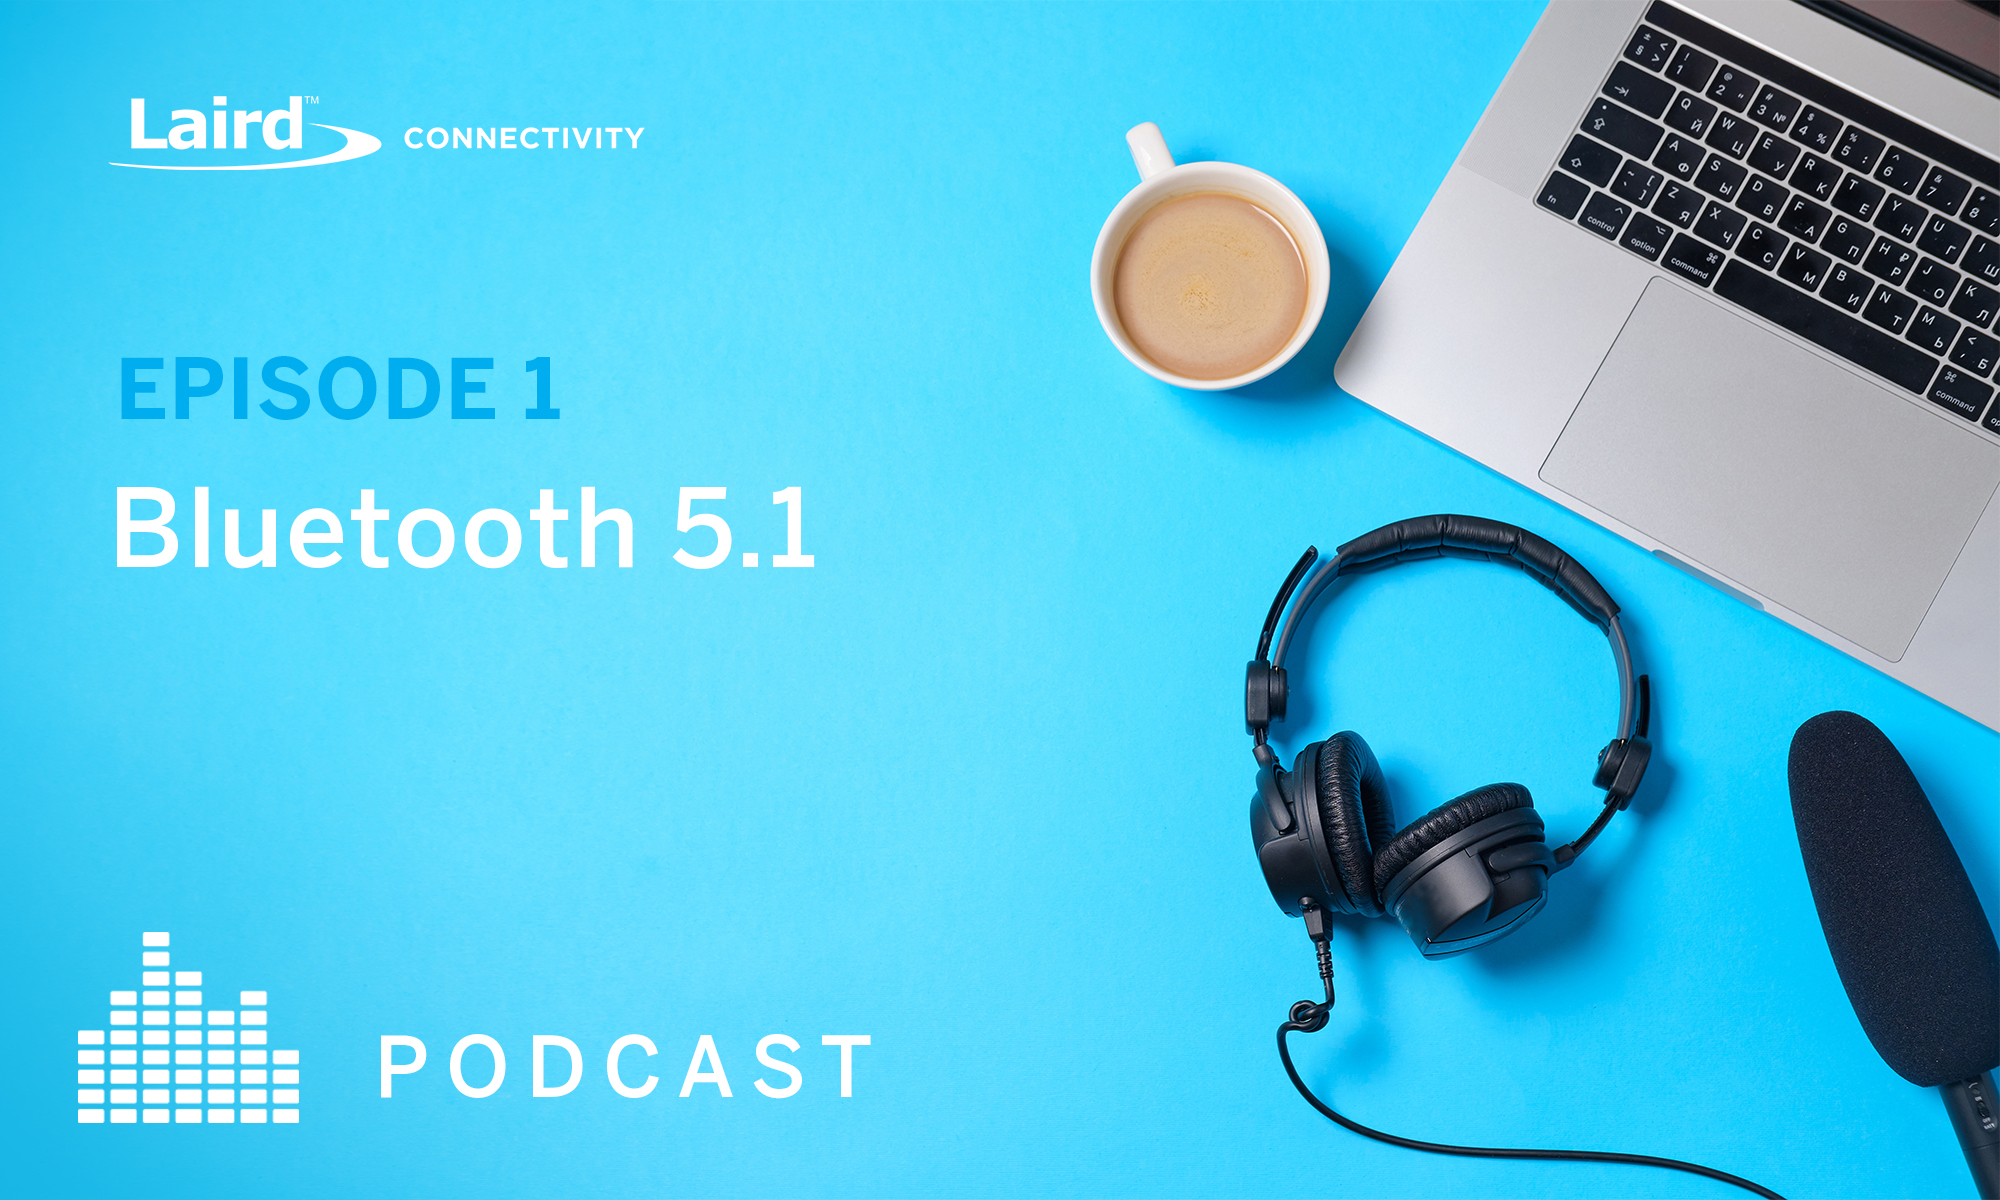 Episode 1: What's New in Bluetooth 5.1